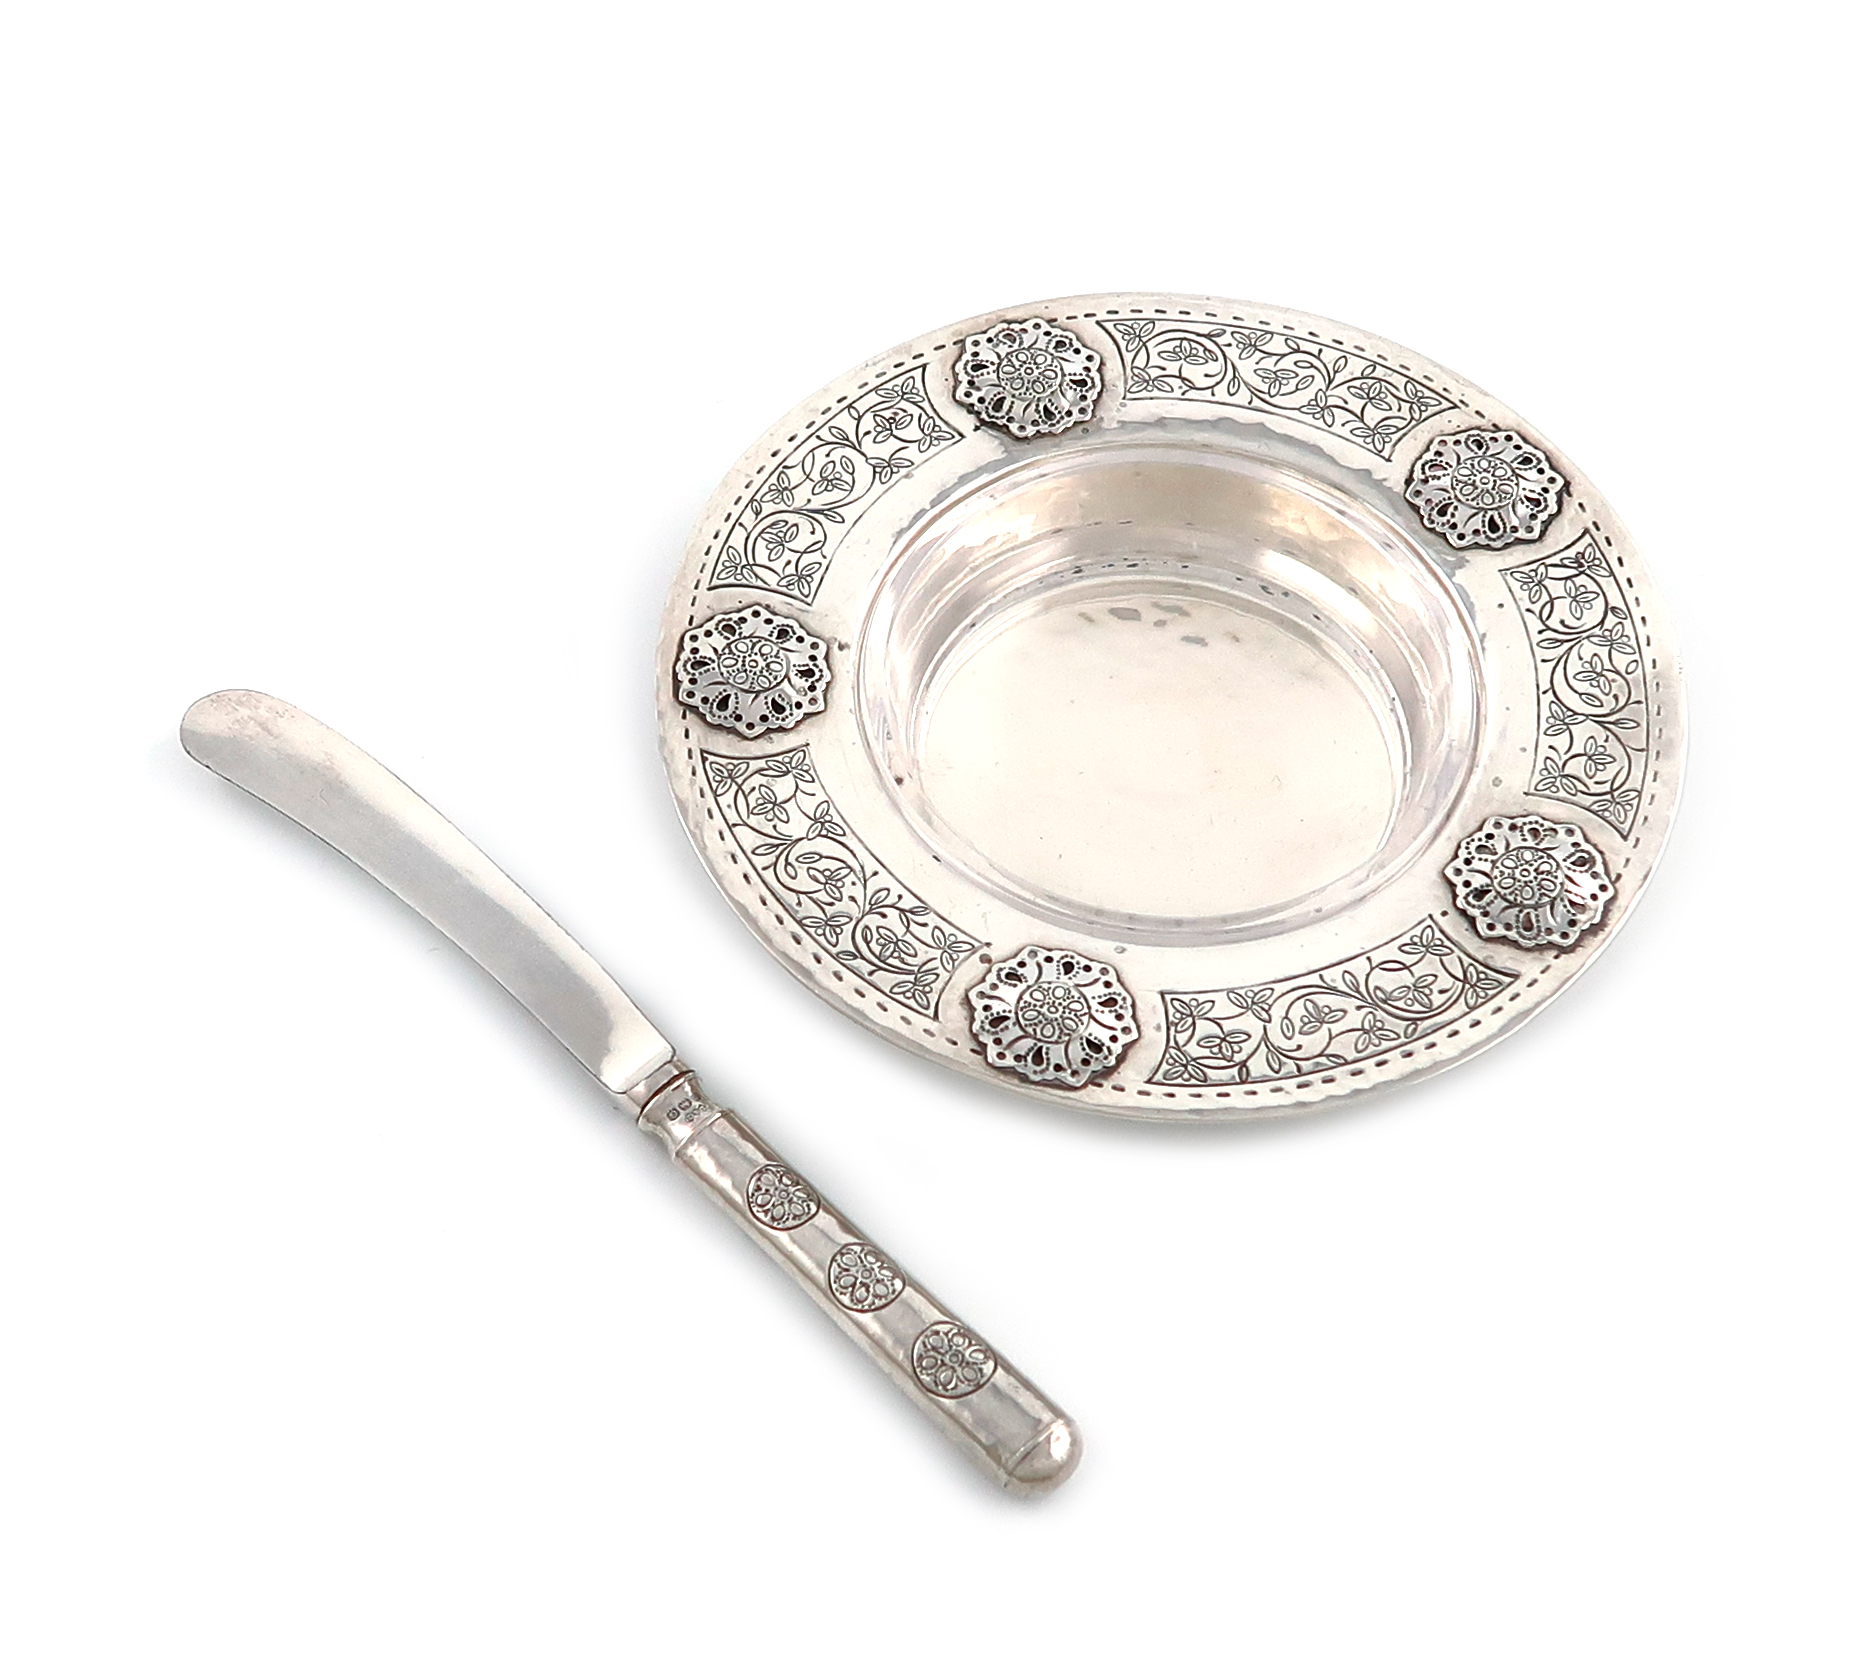 By Liberty and Co., an Arts and Crafts silver butter dish and butter knife, Birmingham 1927, the